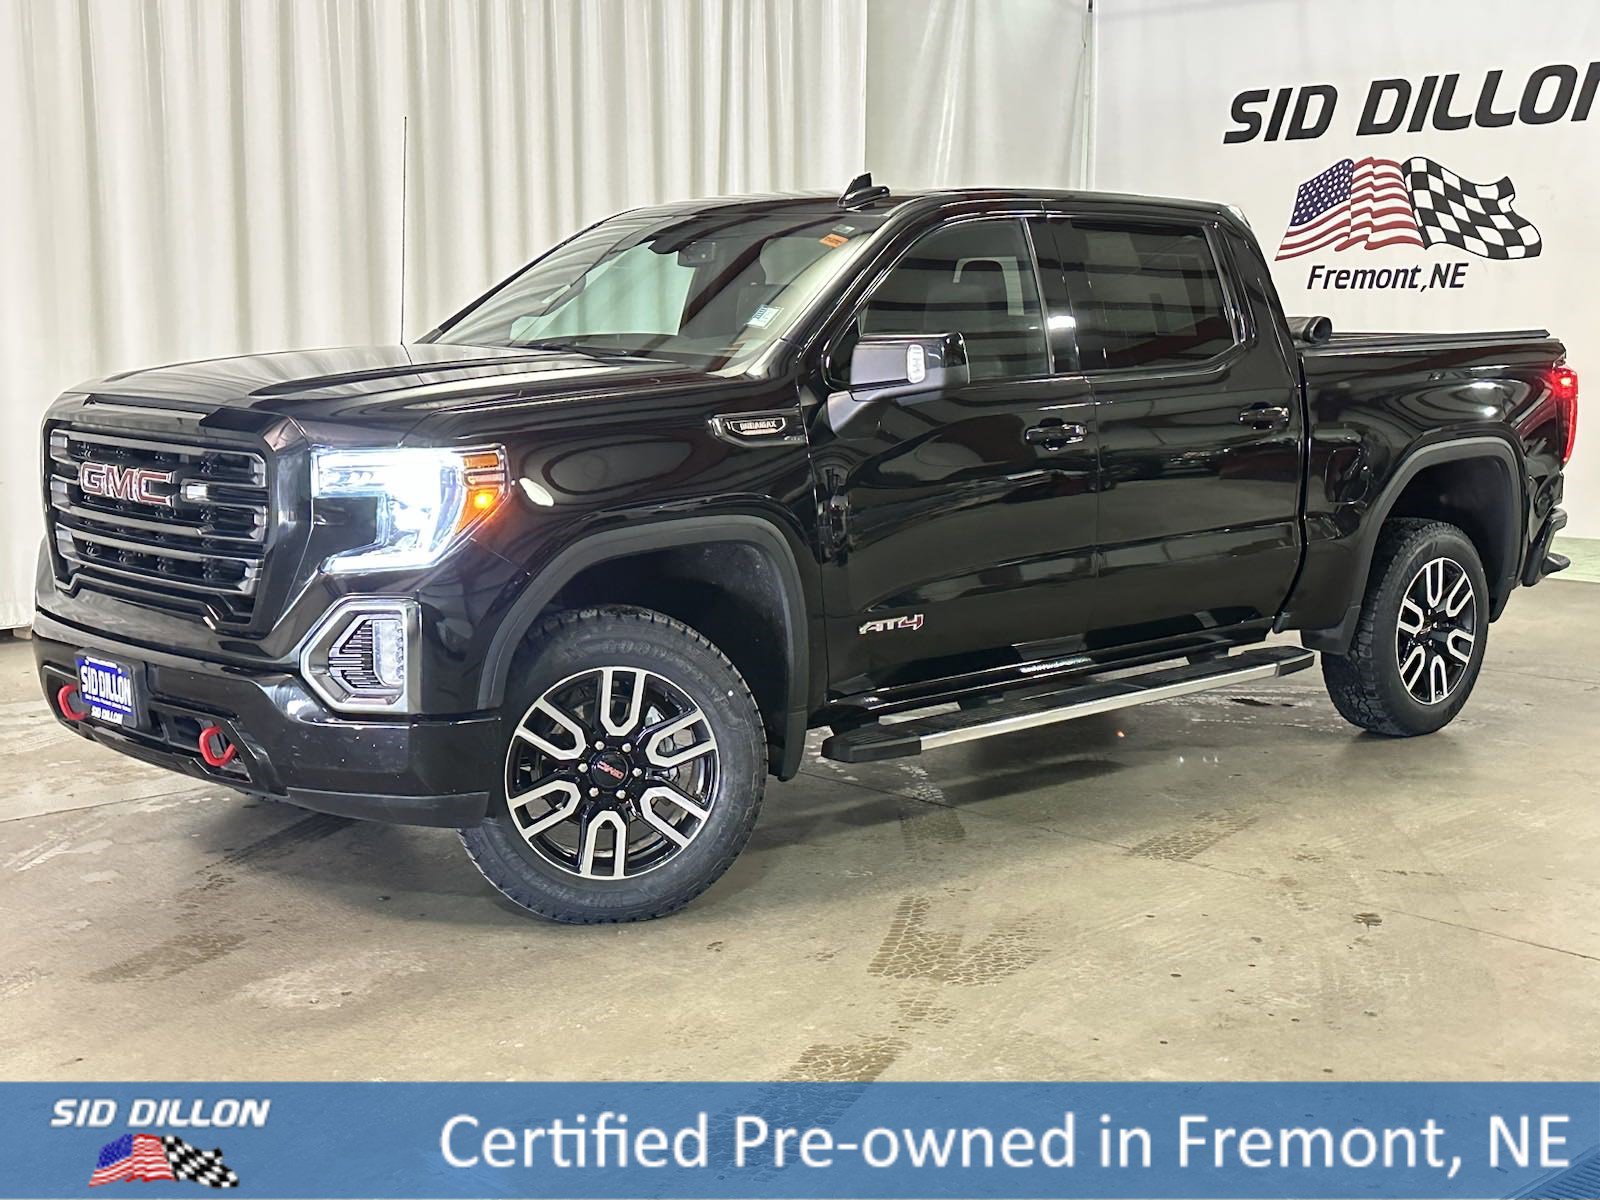 Pre-Owned 2021 GMC Sierra 1500 AT4 Crew Cab in Crete #1T0310H | Sid Dillon  Chrysler Dodge Jeep Ram